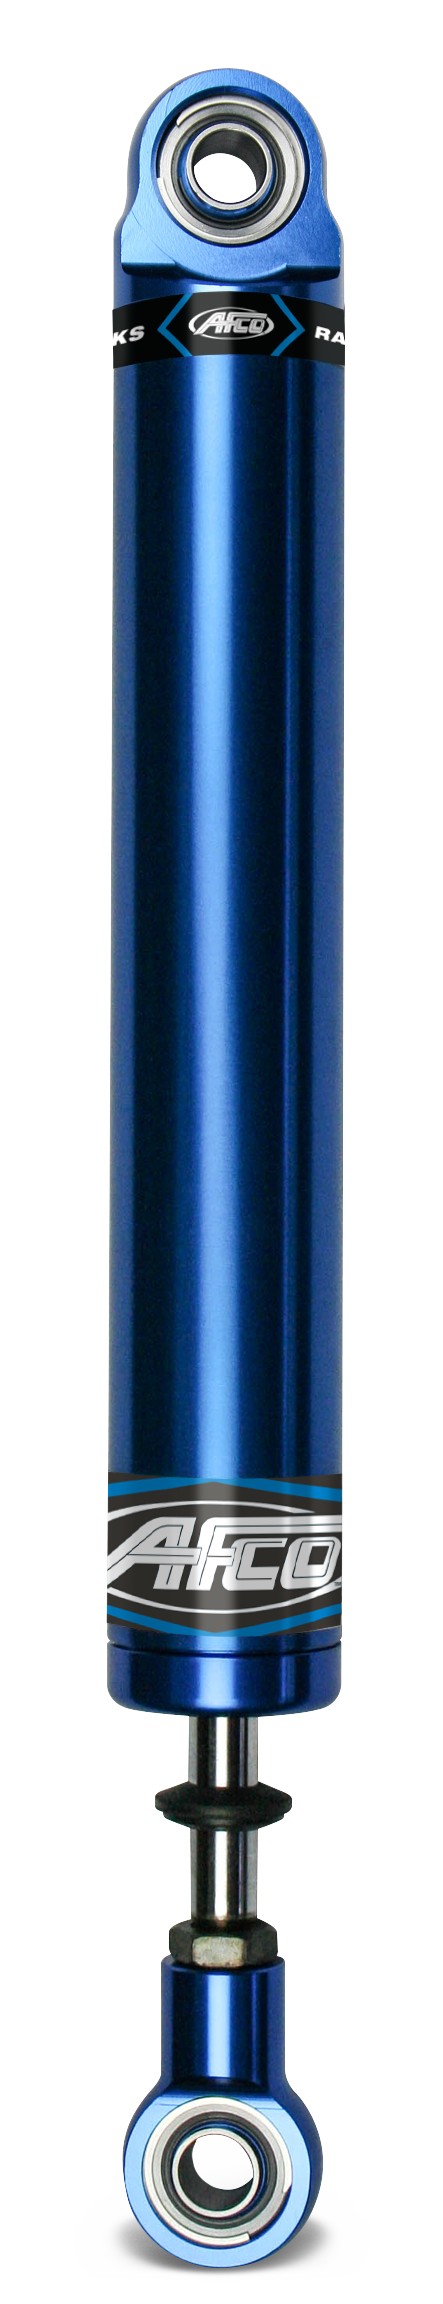 Aluminum Shock Twin Tube 16 Series Small Body 7 Inch Comp 2/Reb 6 Smooth   